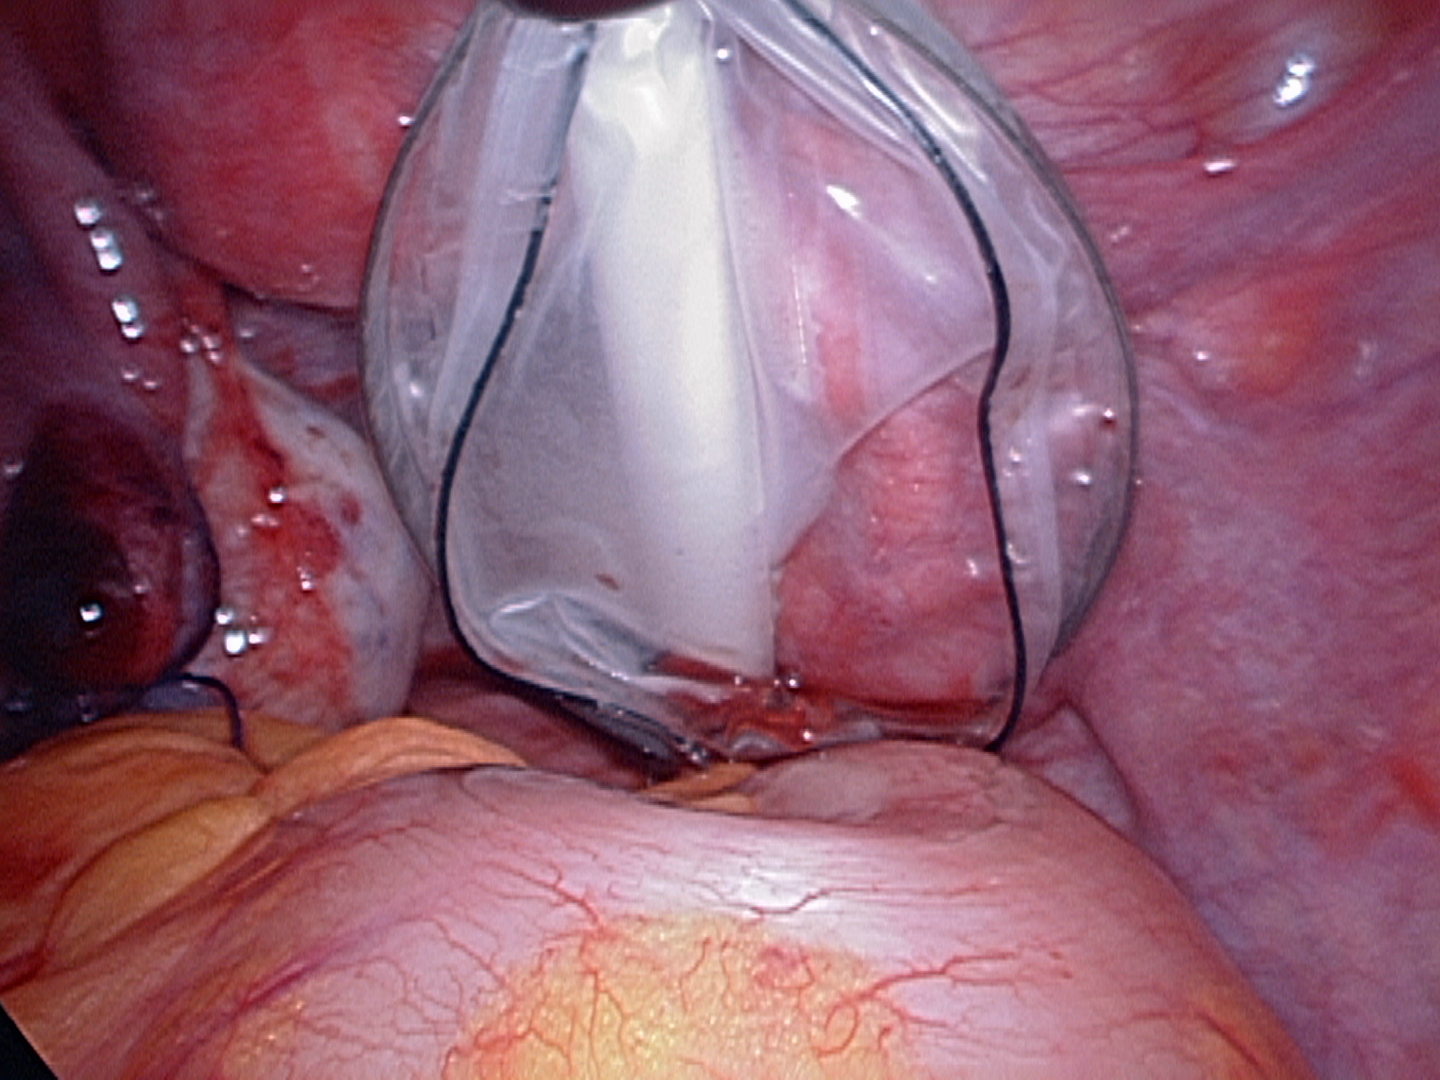 Endopouch to remove twisted-fallopian tube